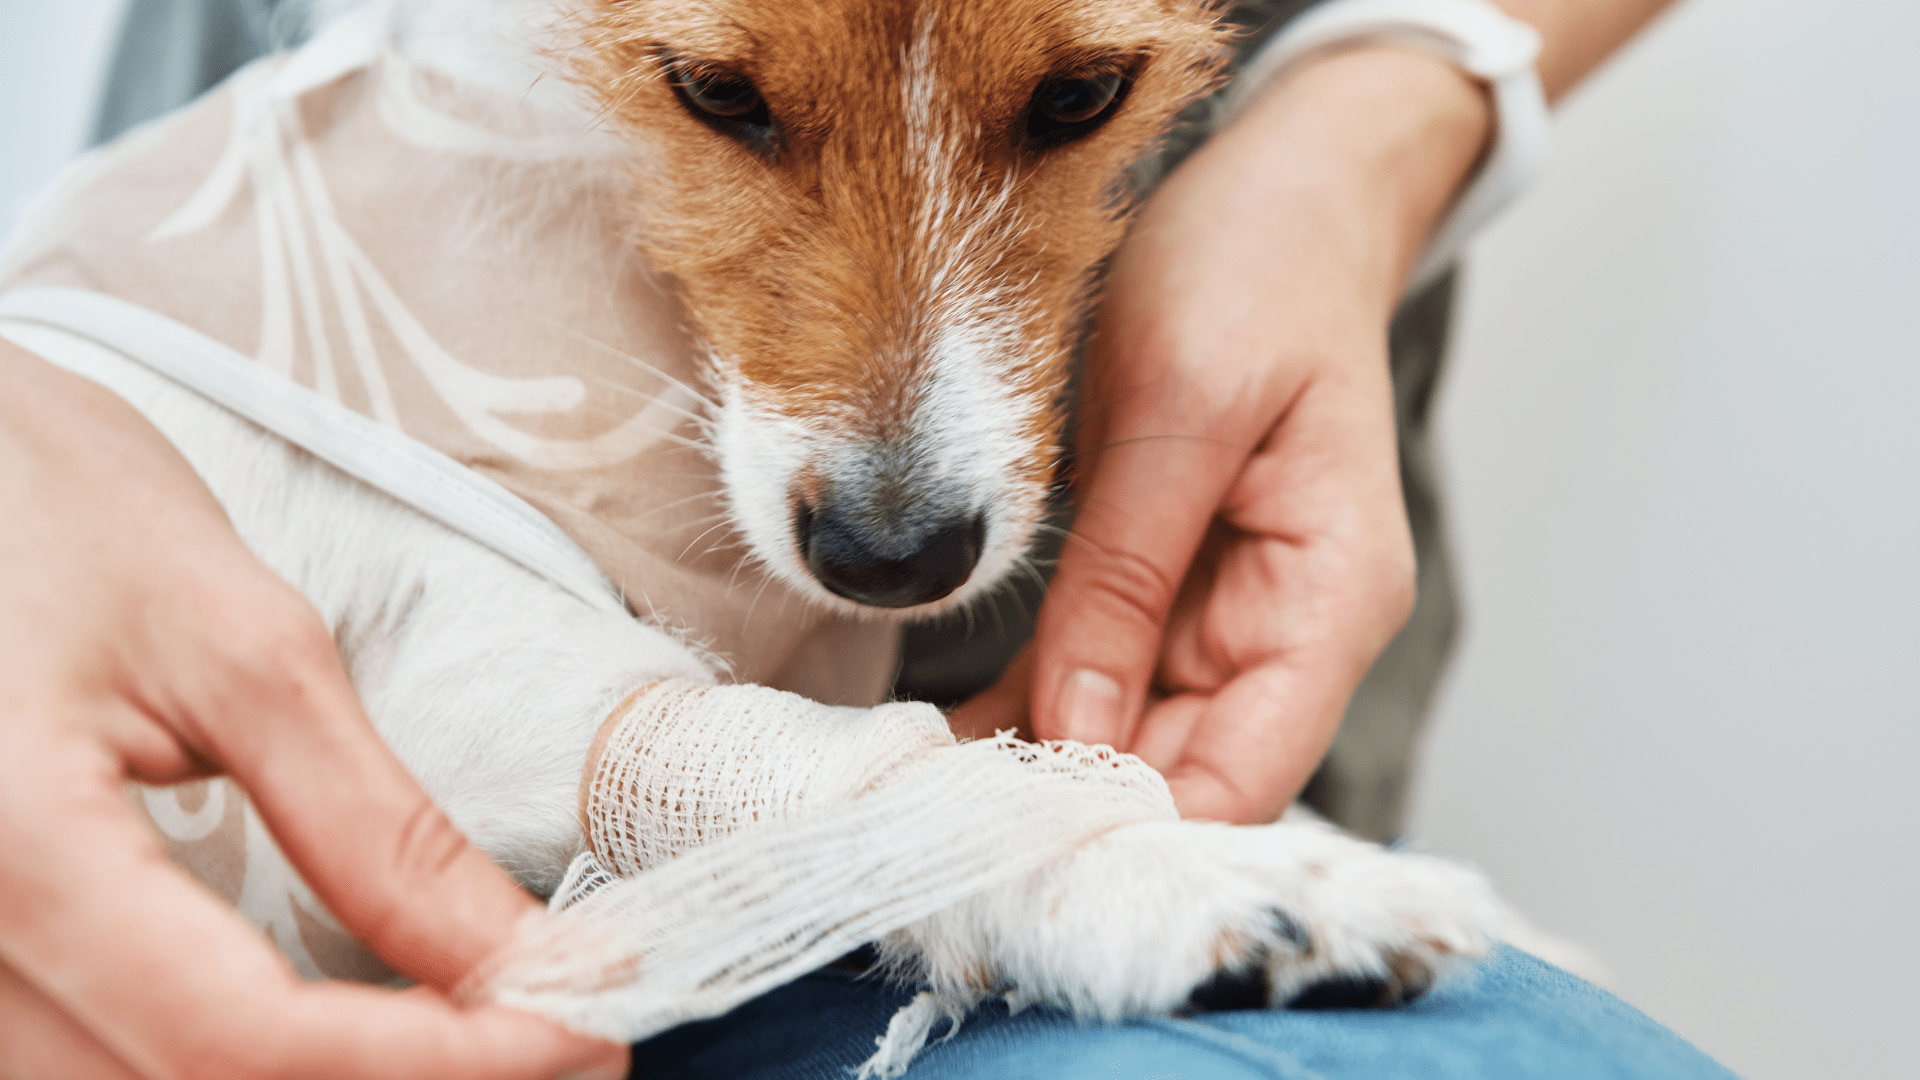 Pet surgery is stressful for animals and pet parents